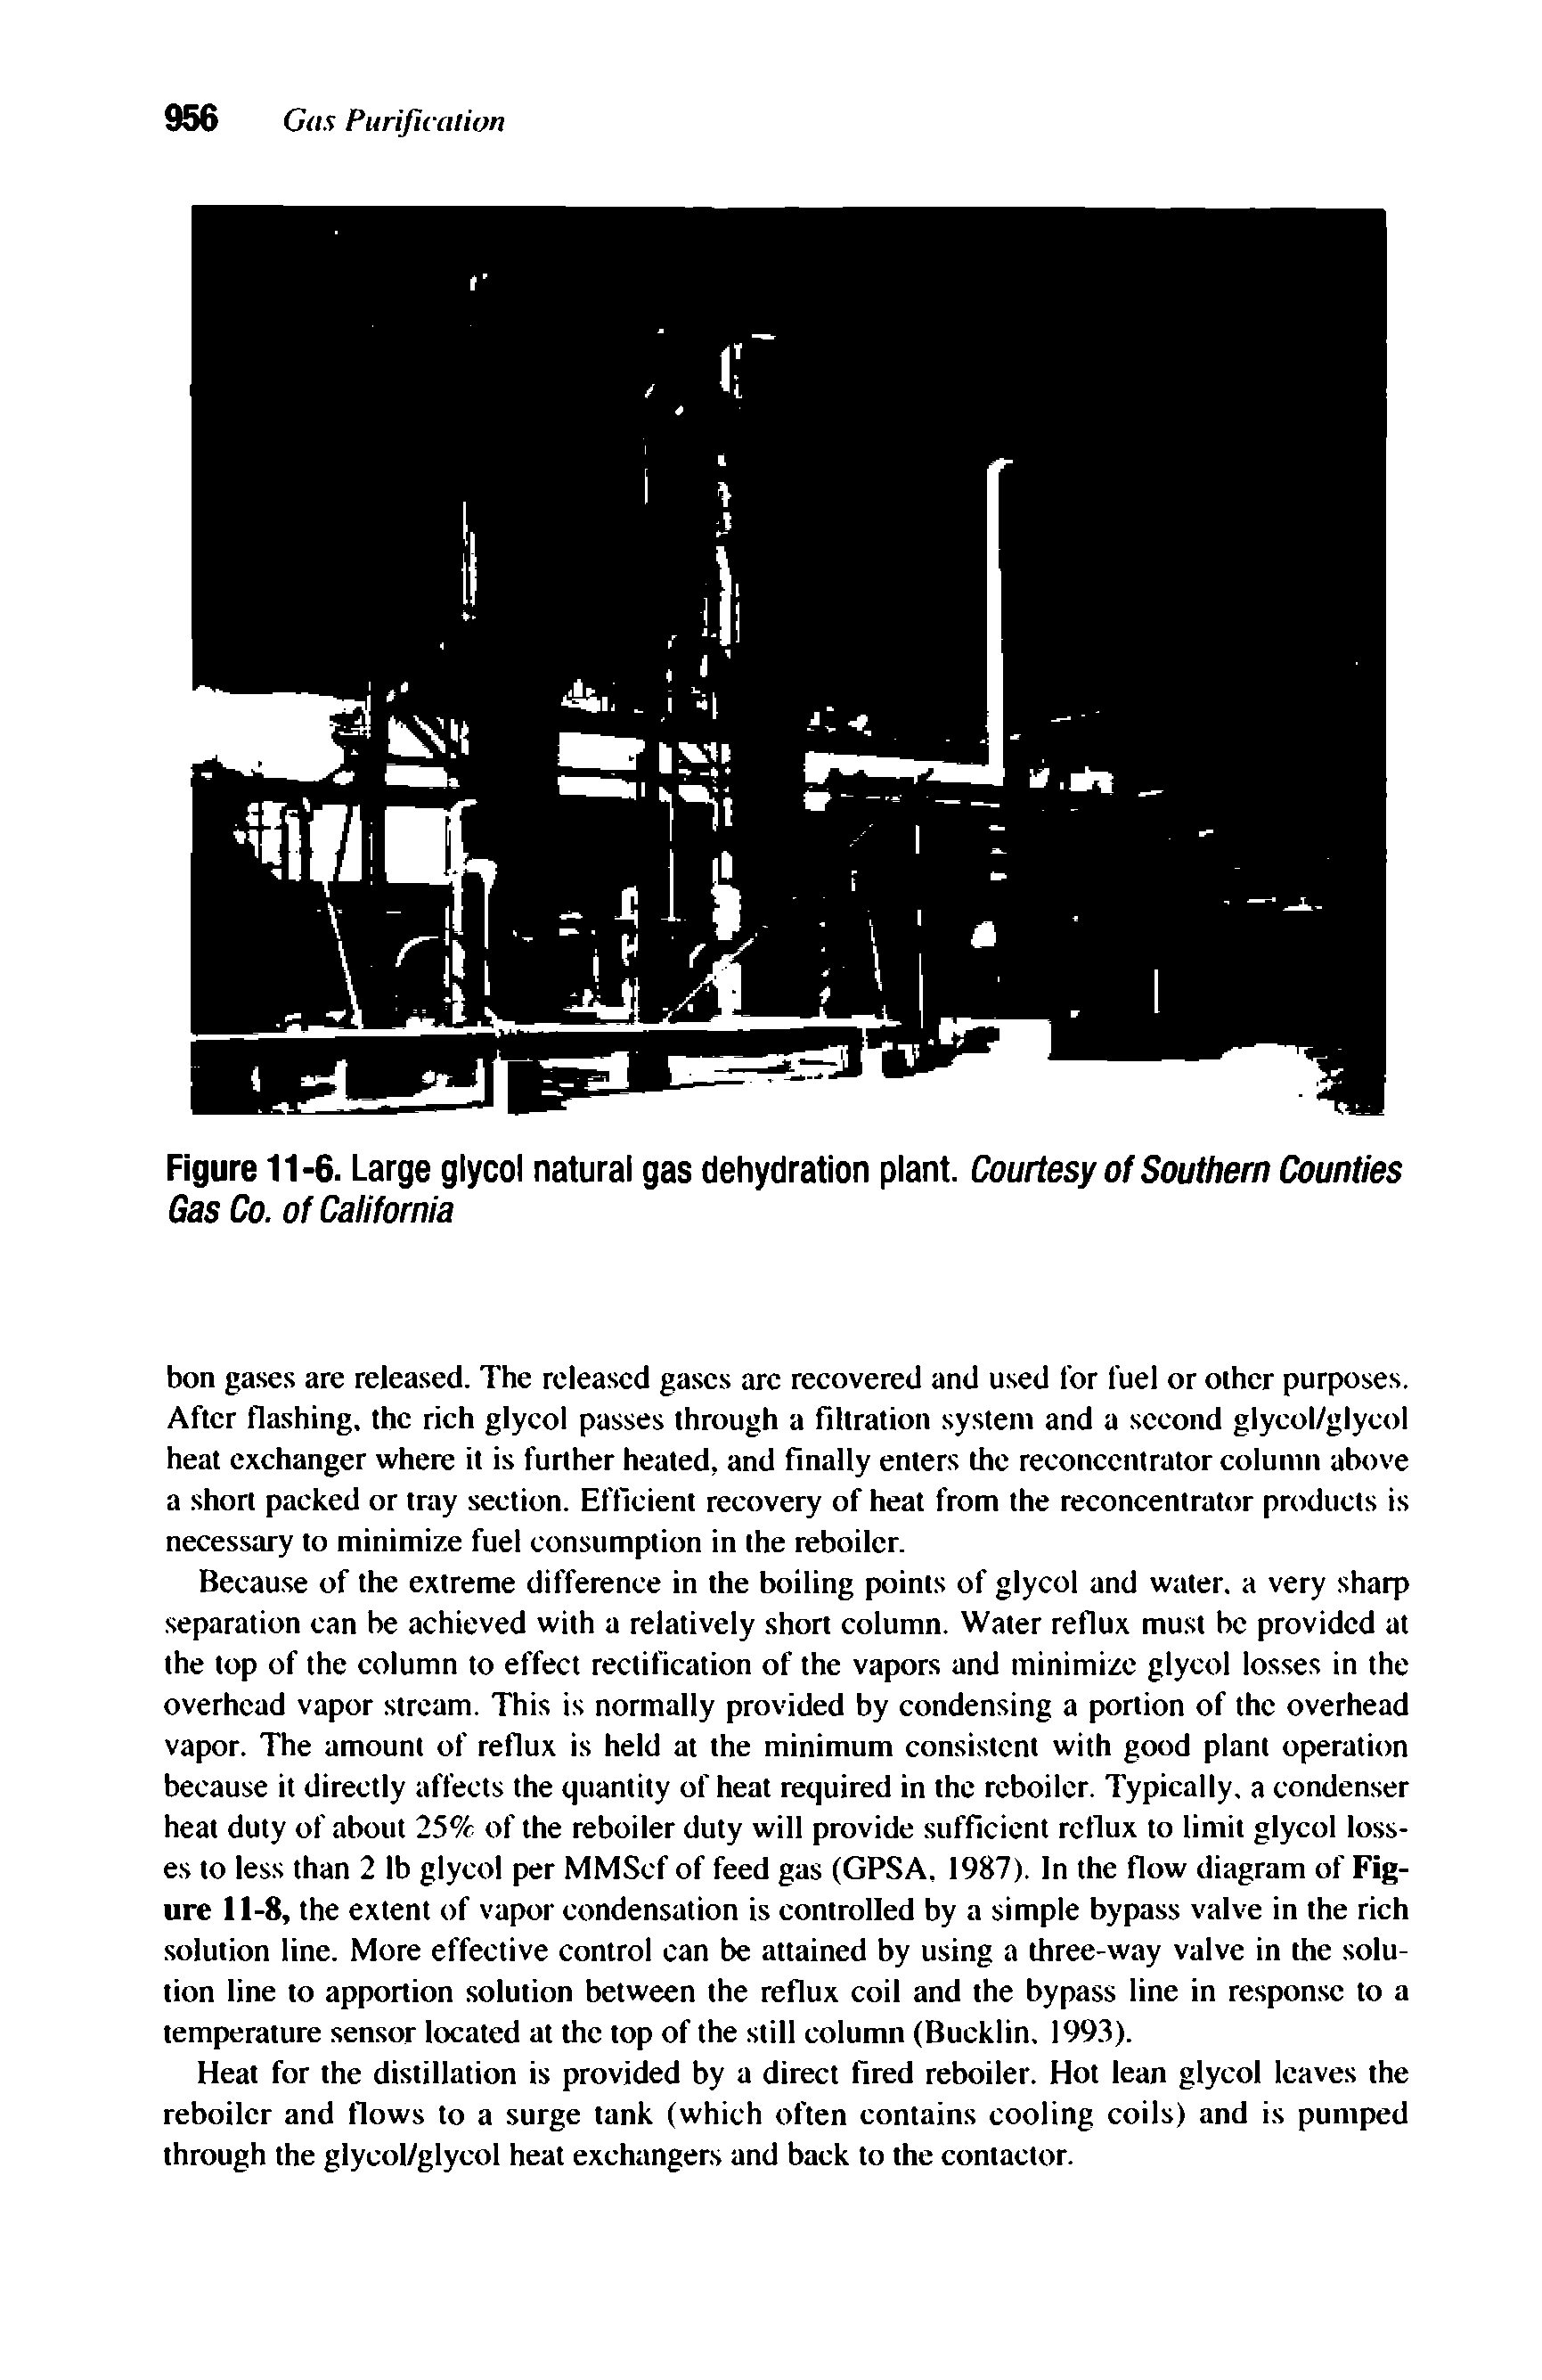 Figure 11-6. Large glycol natural gas dehydration plant. Courtesy of Southern Counties Gas Co. of California...